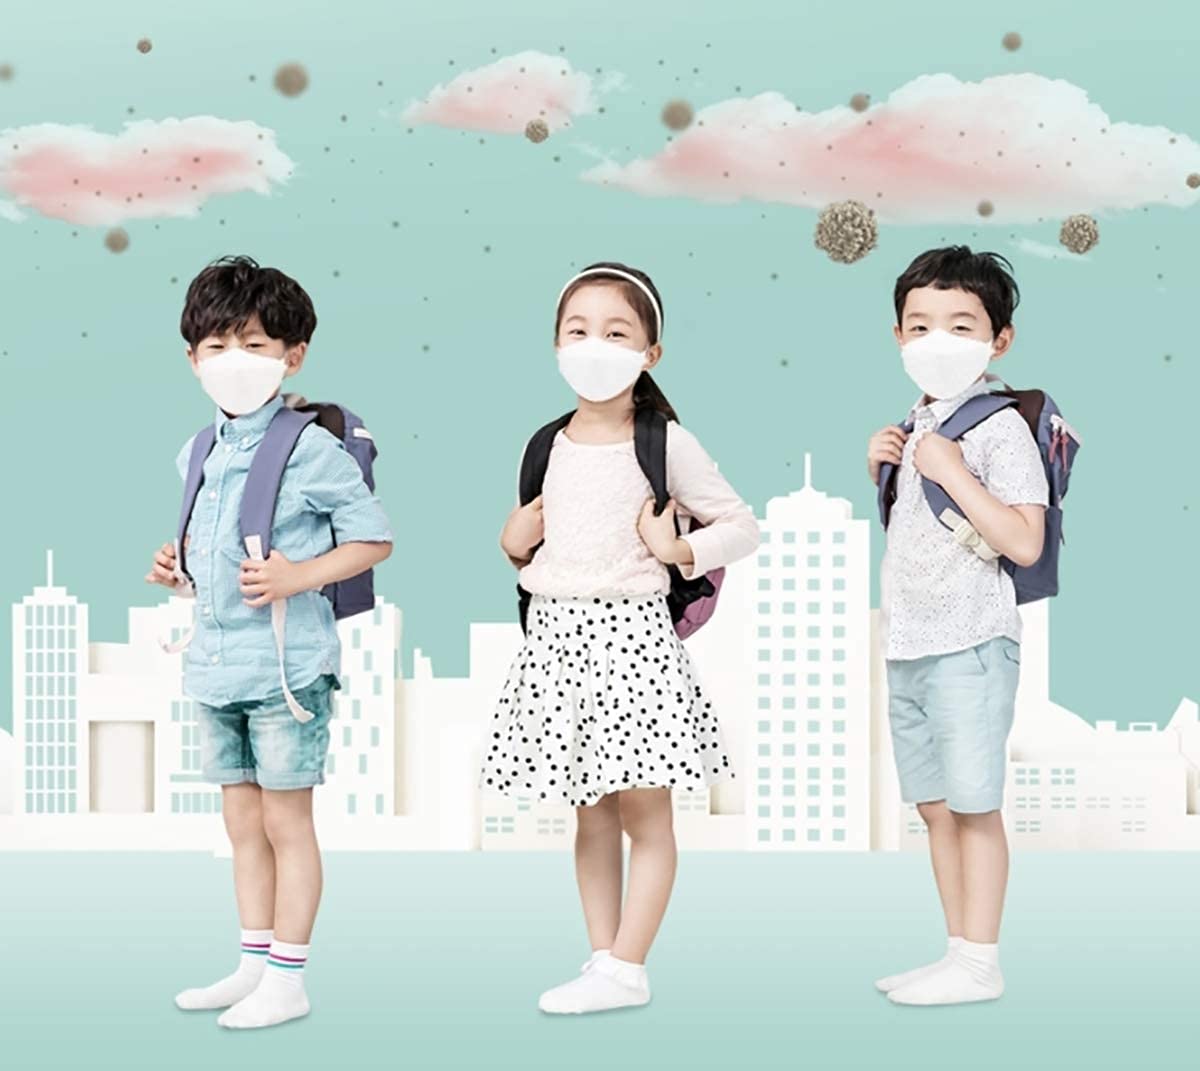 CleanTech [10 Pack] (Age 6 to 15) 4-Layers Premium (KF94 Certified) Kids Face Mask (Made in Korea) Respirators Protective Disposable Dust Covers (Children, Youth, Teens, Small Face Adults) - White -